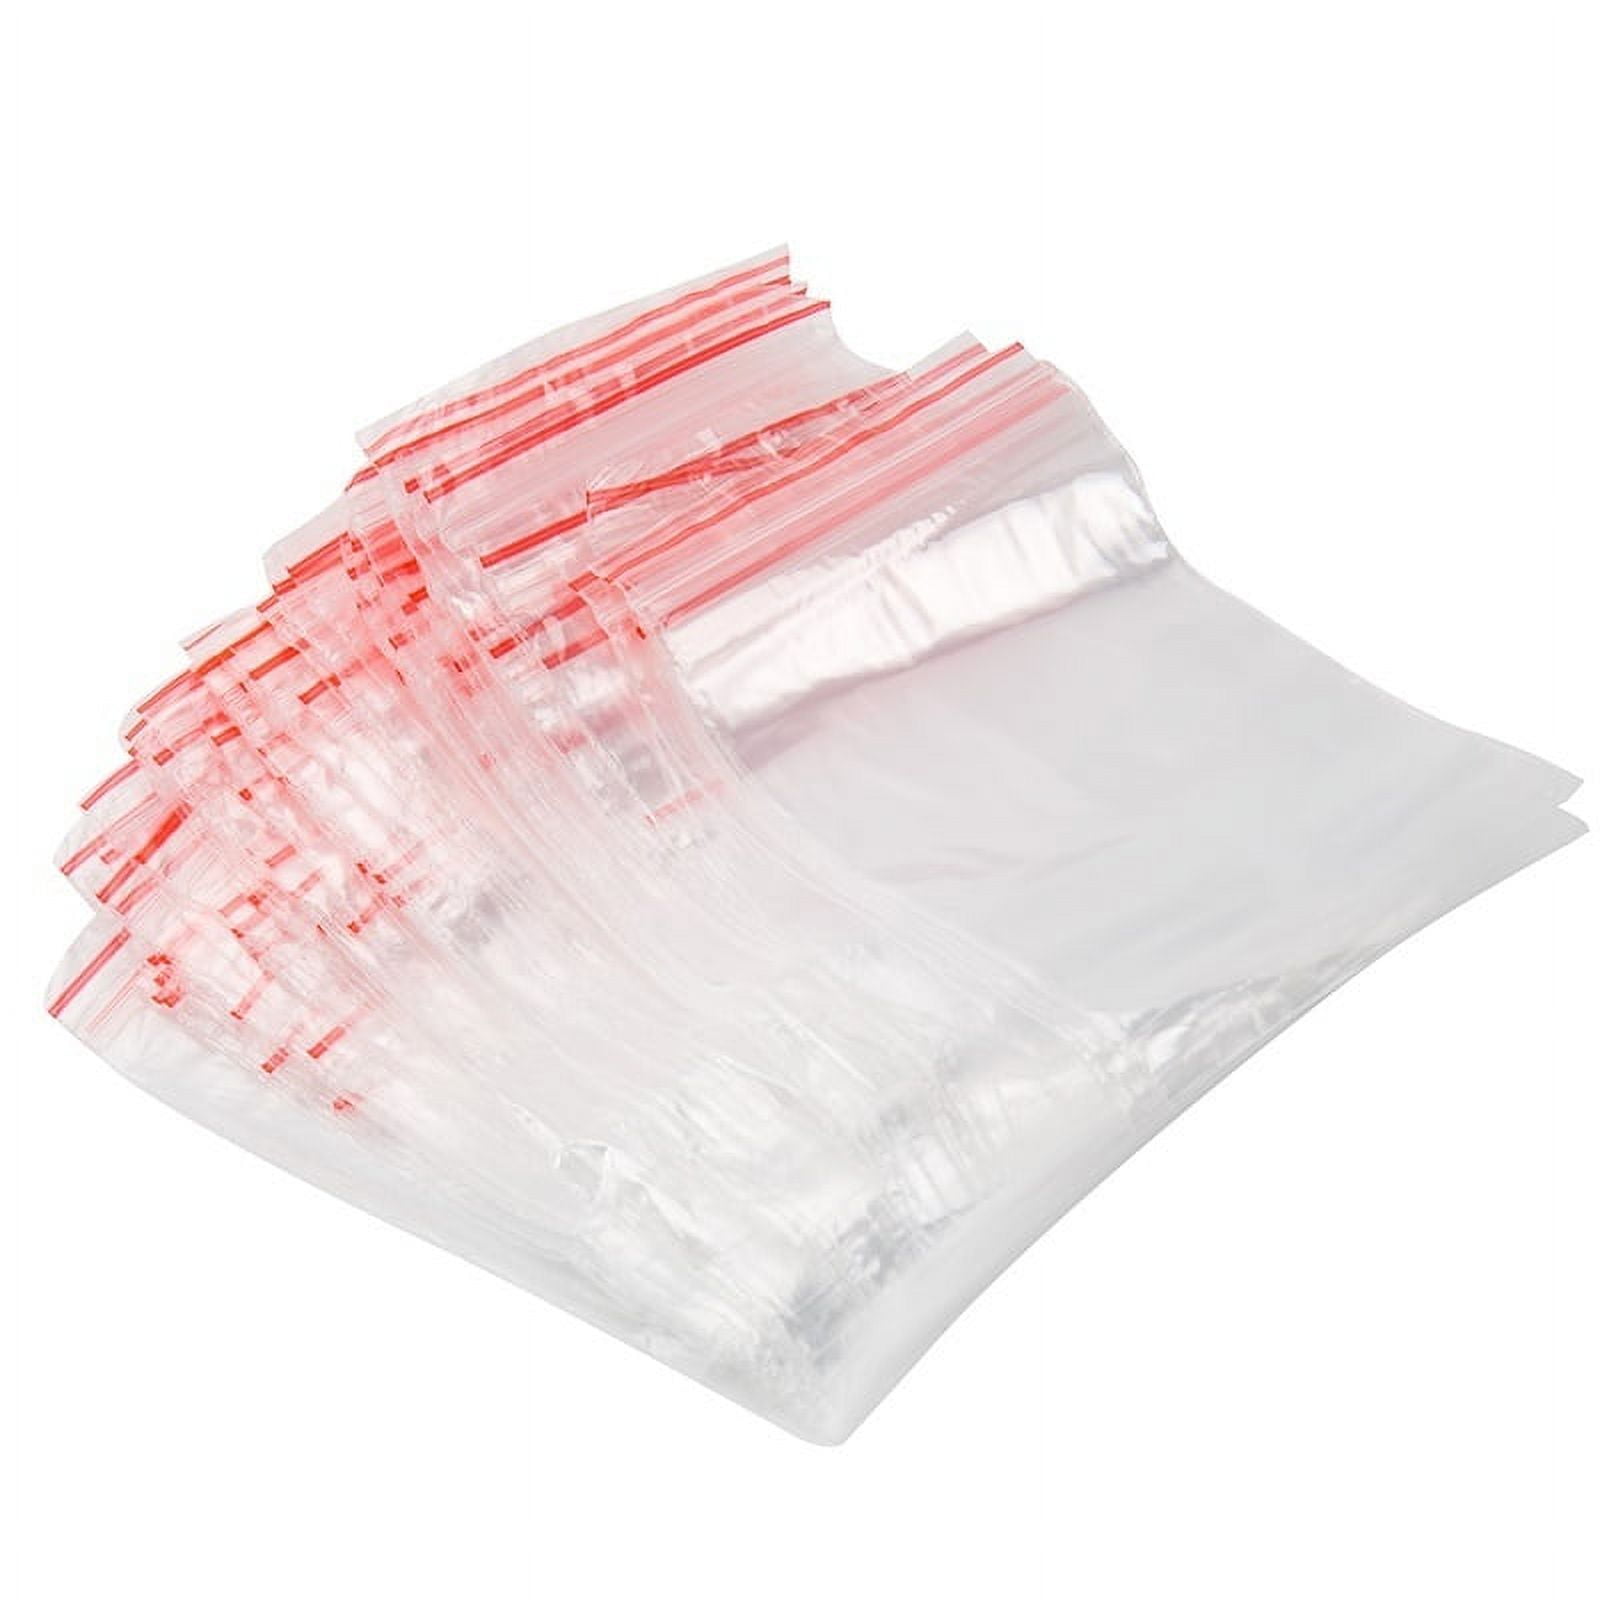  APQ Reclosable Zip Bags with Write-On Block, 2 x 2 Inch. 1000  Pack Plastic Zip Baggies. Sturdy 2 Mil Plastic Jewelry Bags. Waterproof Jewelry  Plastic Bags with Zipper Closure. Poly Bags